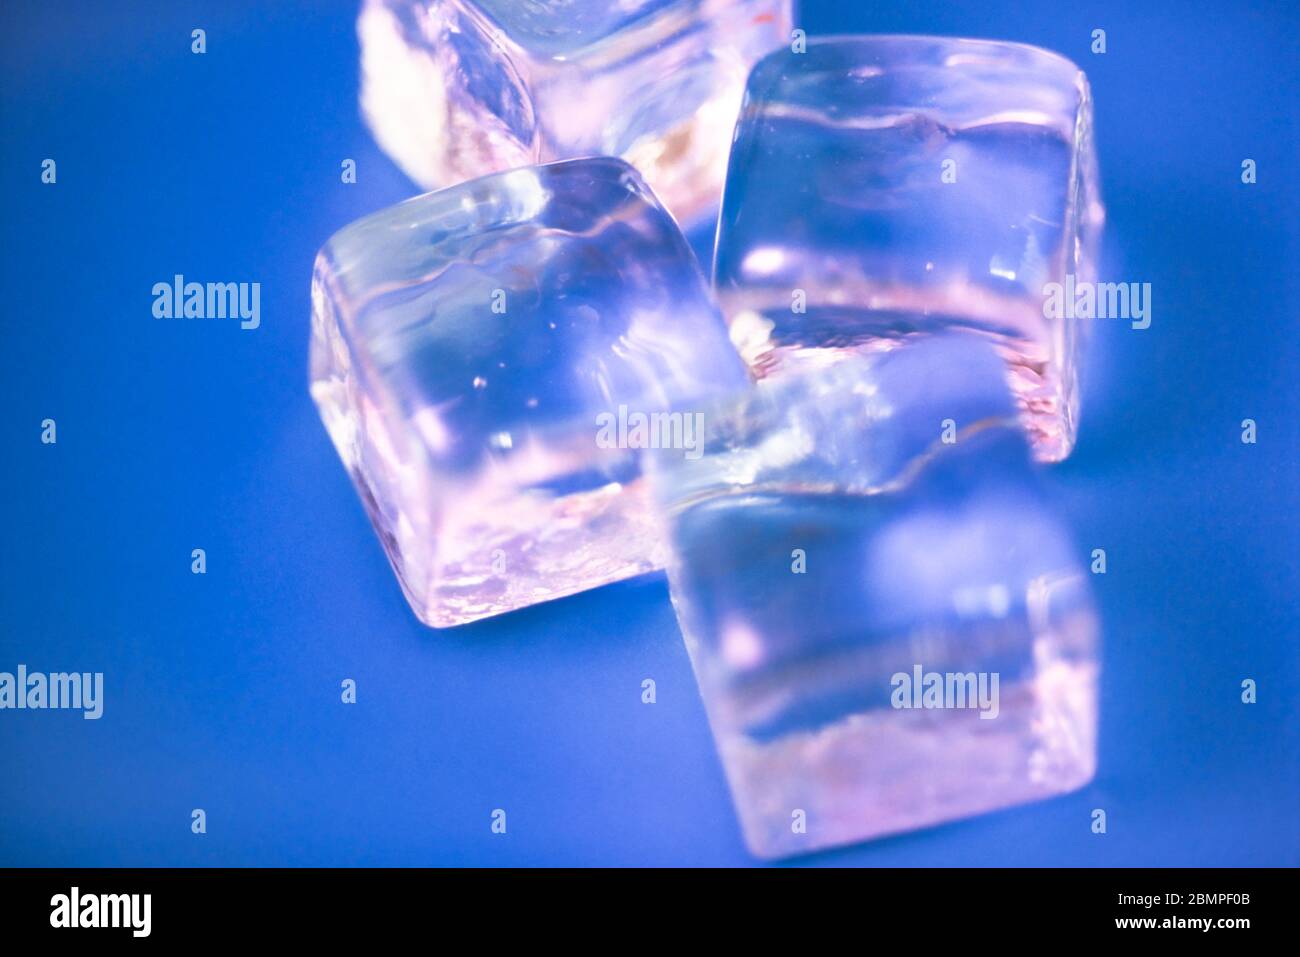 Four Ice cubes against a blue purple background Stock Photo